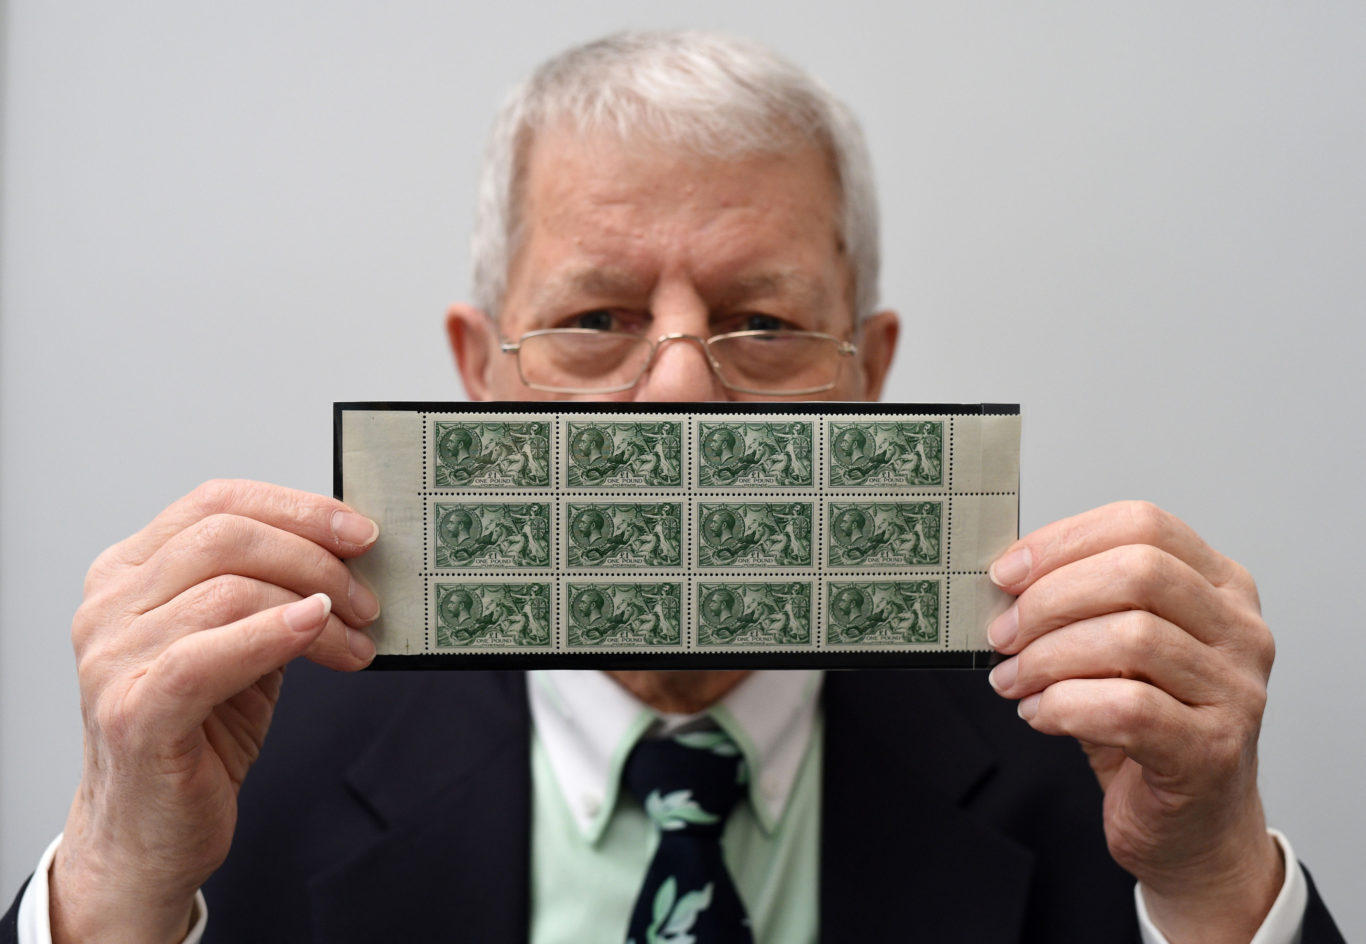 collection of twelve SG 403 £1 green stamps, 1913 Waterlow Printing seahorse issue, worth £125,000 (Kirsty O'Connor/PA)